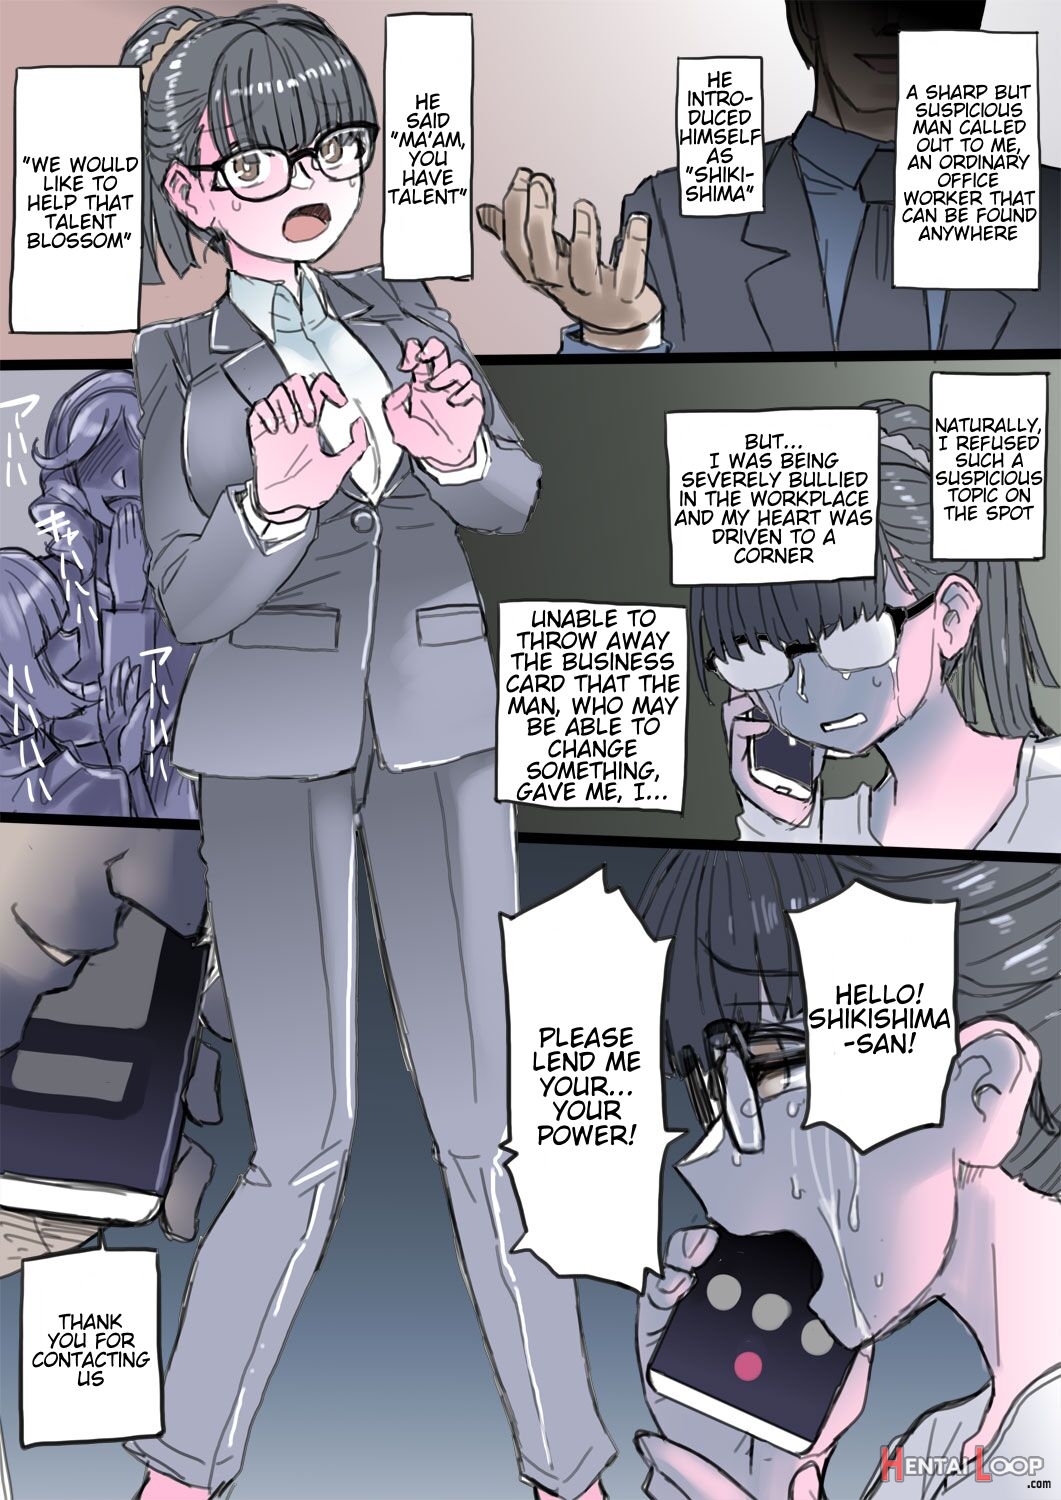 Evil Transformation Sex - The Office Lady That Was Bullied Is Remodelled Into An Evil Cyborg Soldier  And Carries Out Revenge (by 581) - Hentai doujinshi for free at HentaiLoop